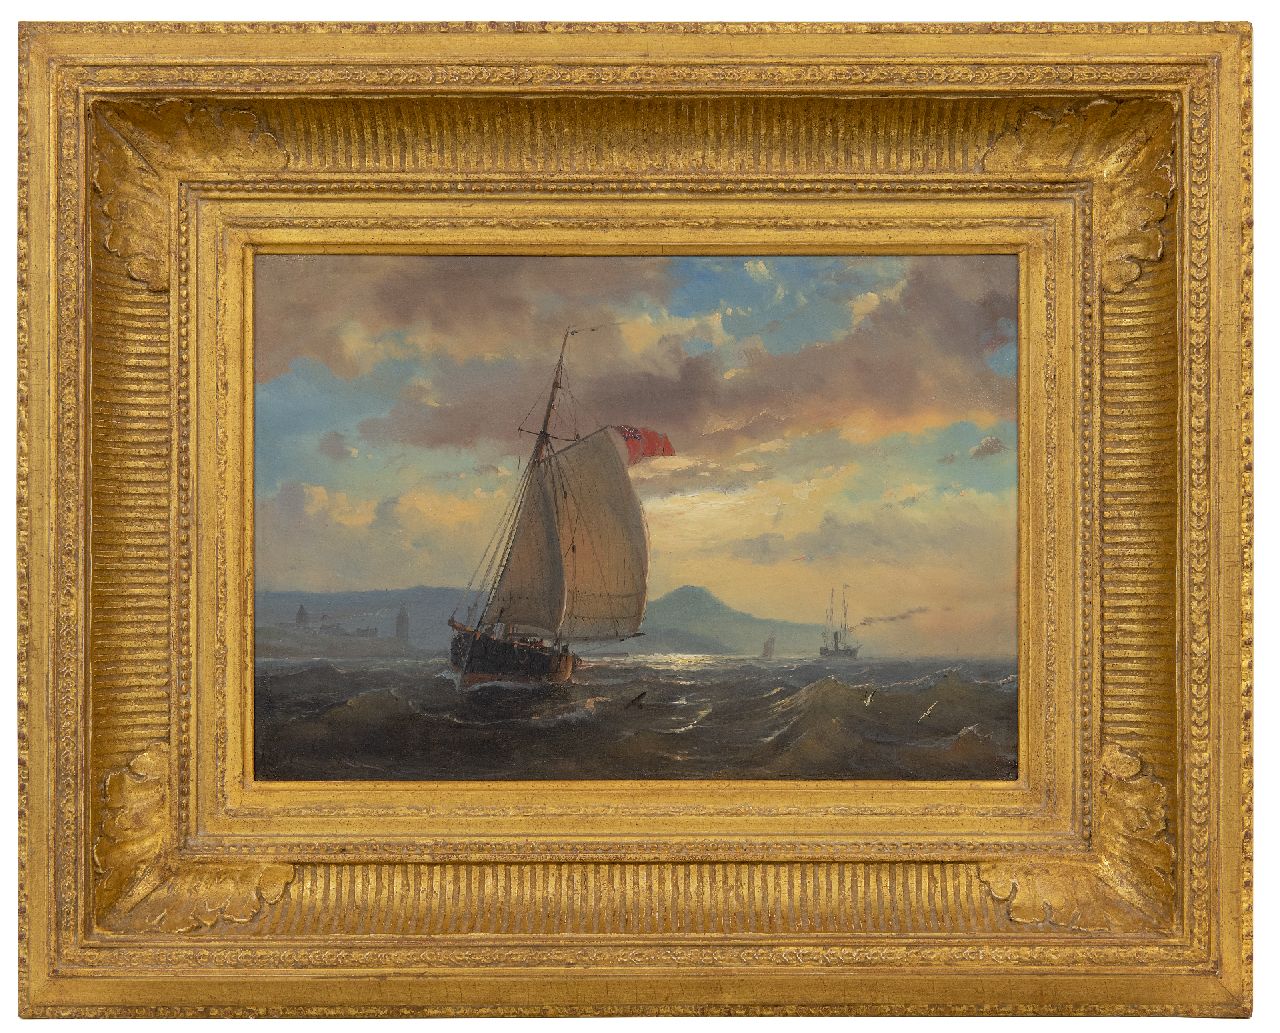 Schiedges P.P.  | Petrus Paulus Schiedges | Paintings offered for sale | Sailing ship off the English coast, oil on panel 25.5 x 36.4 cm, signed l.l. and dated '62